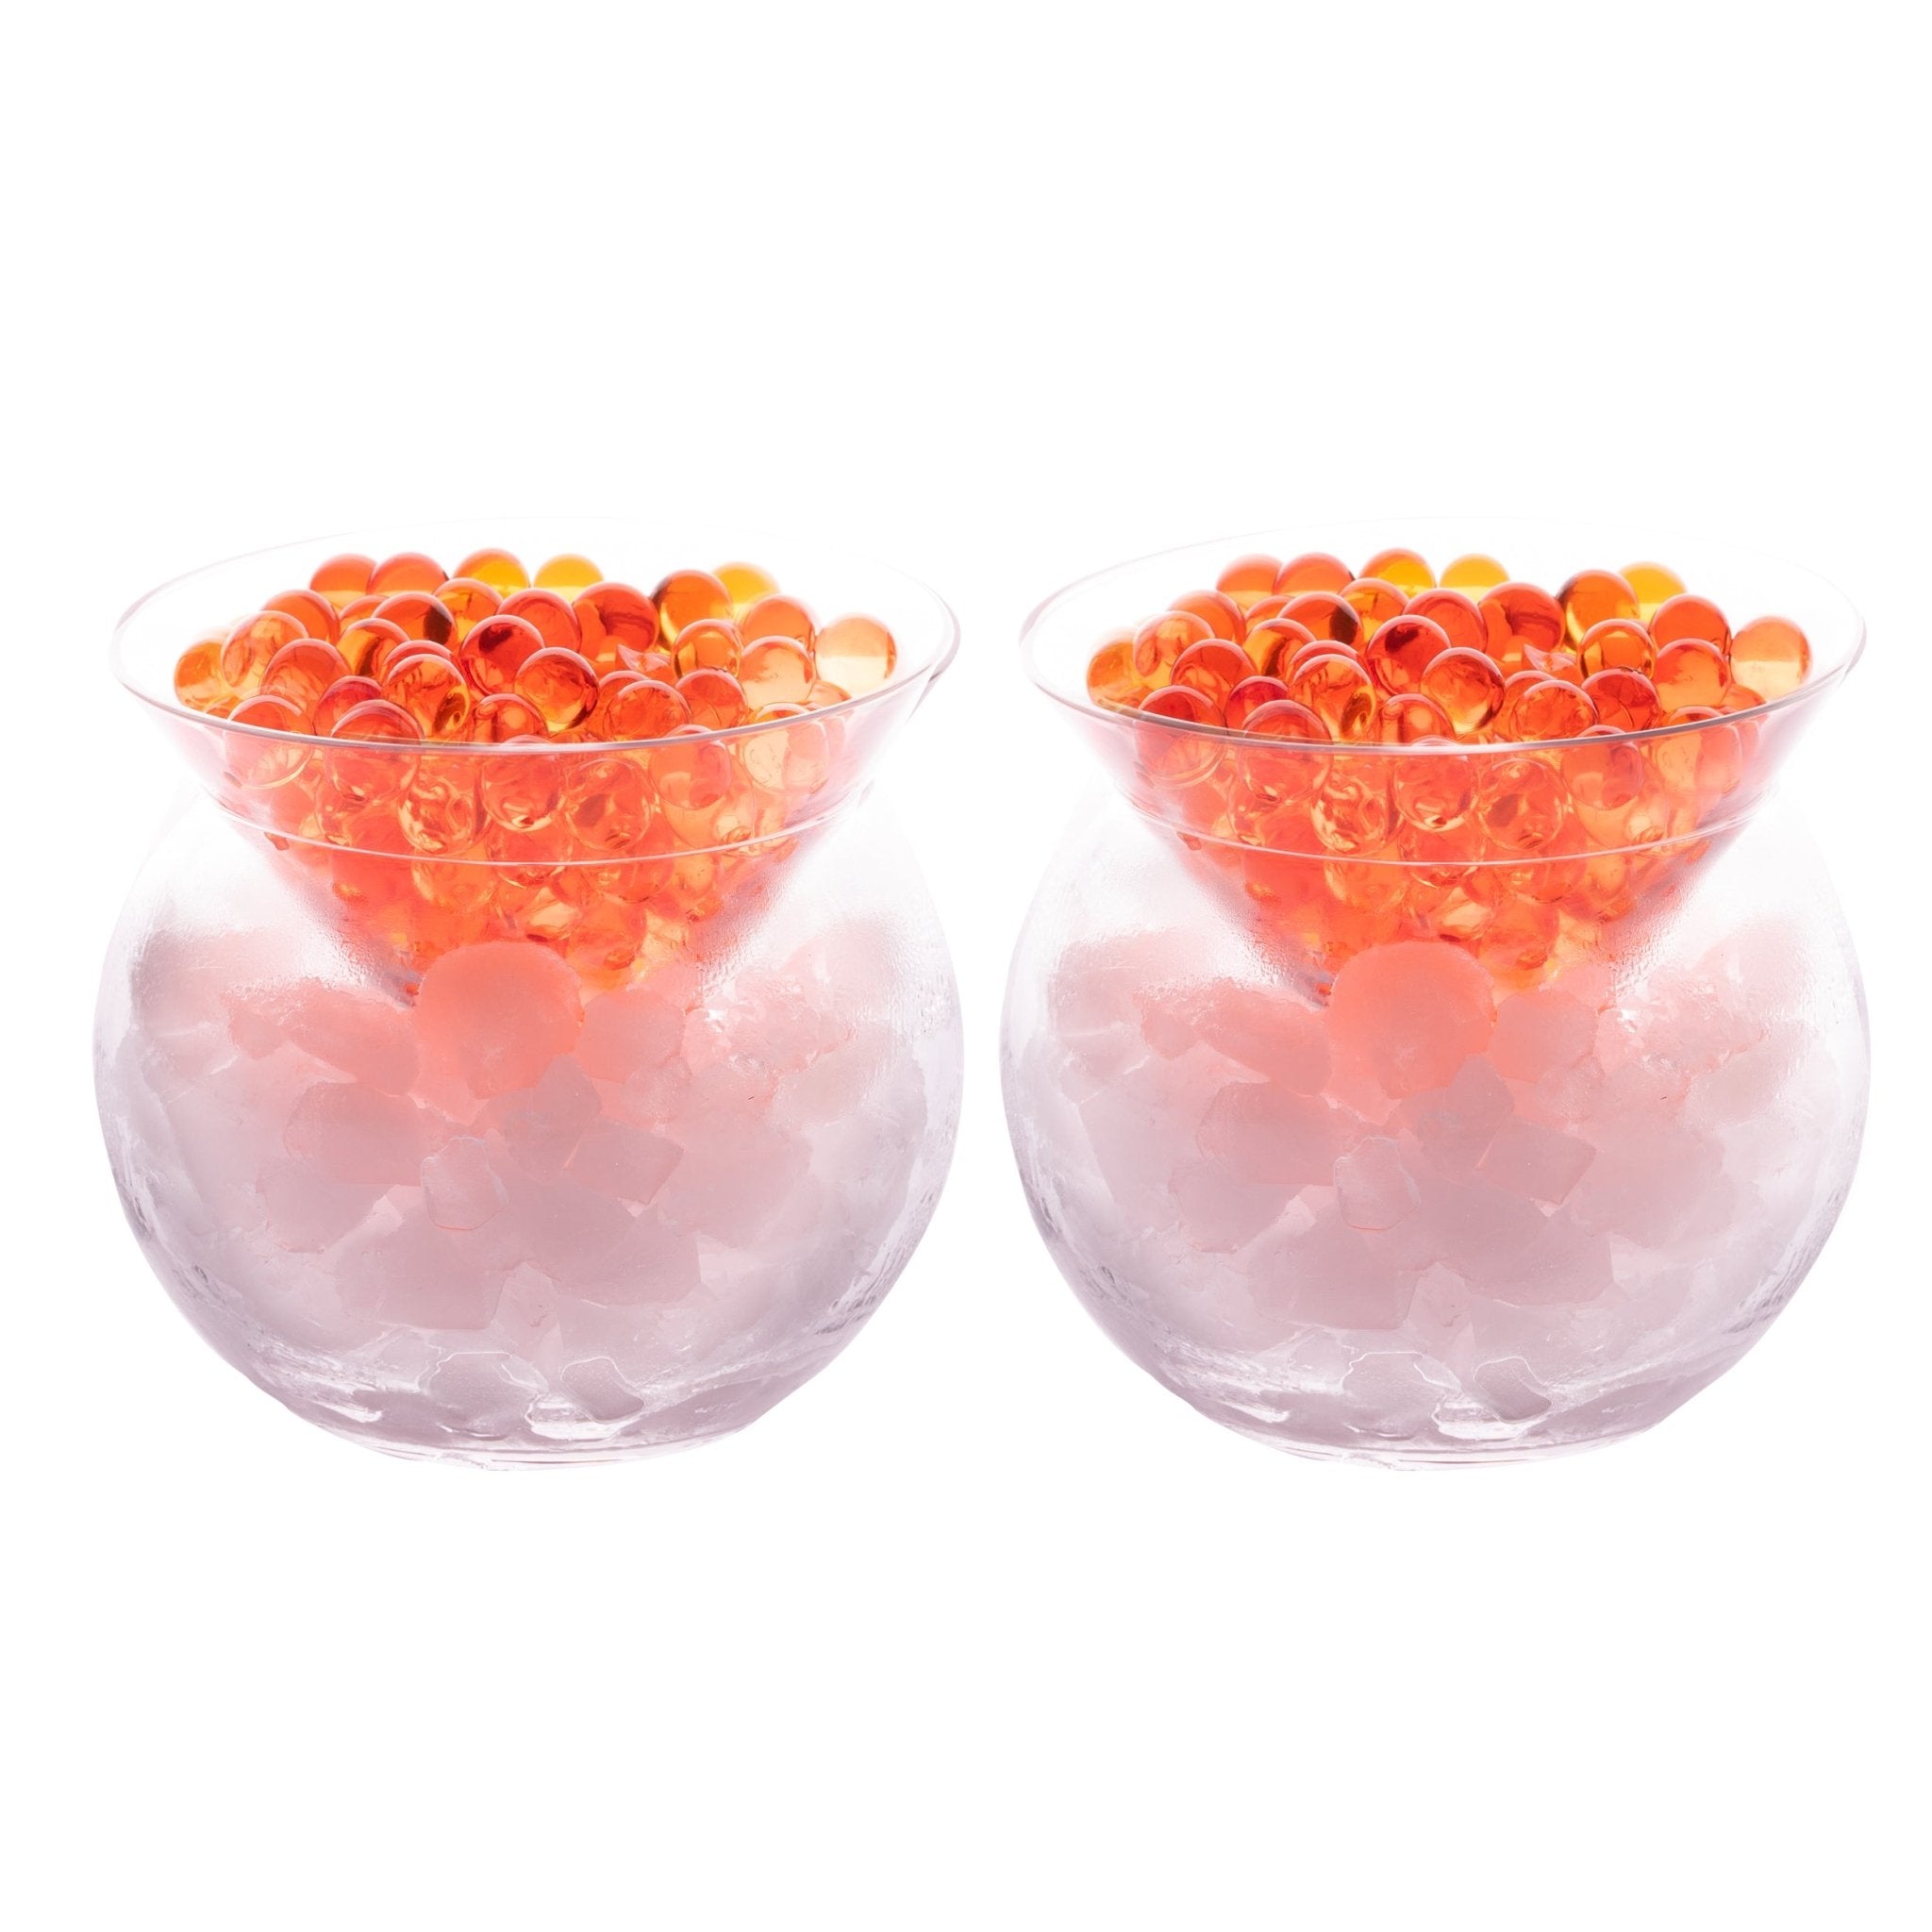  Cocktails Glasses with Ice Bowl